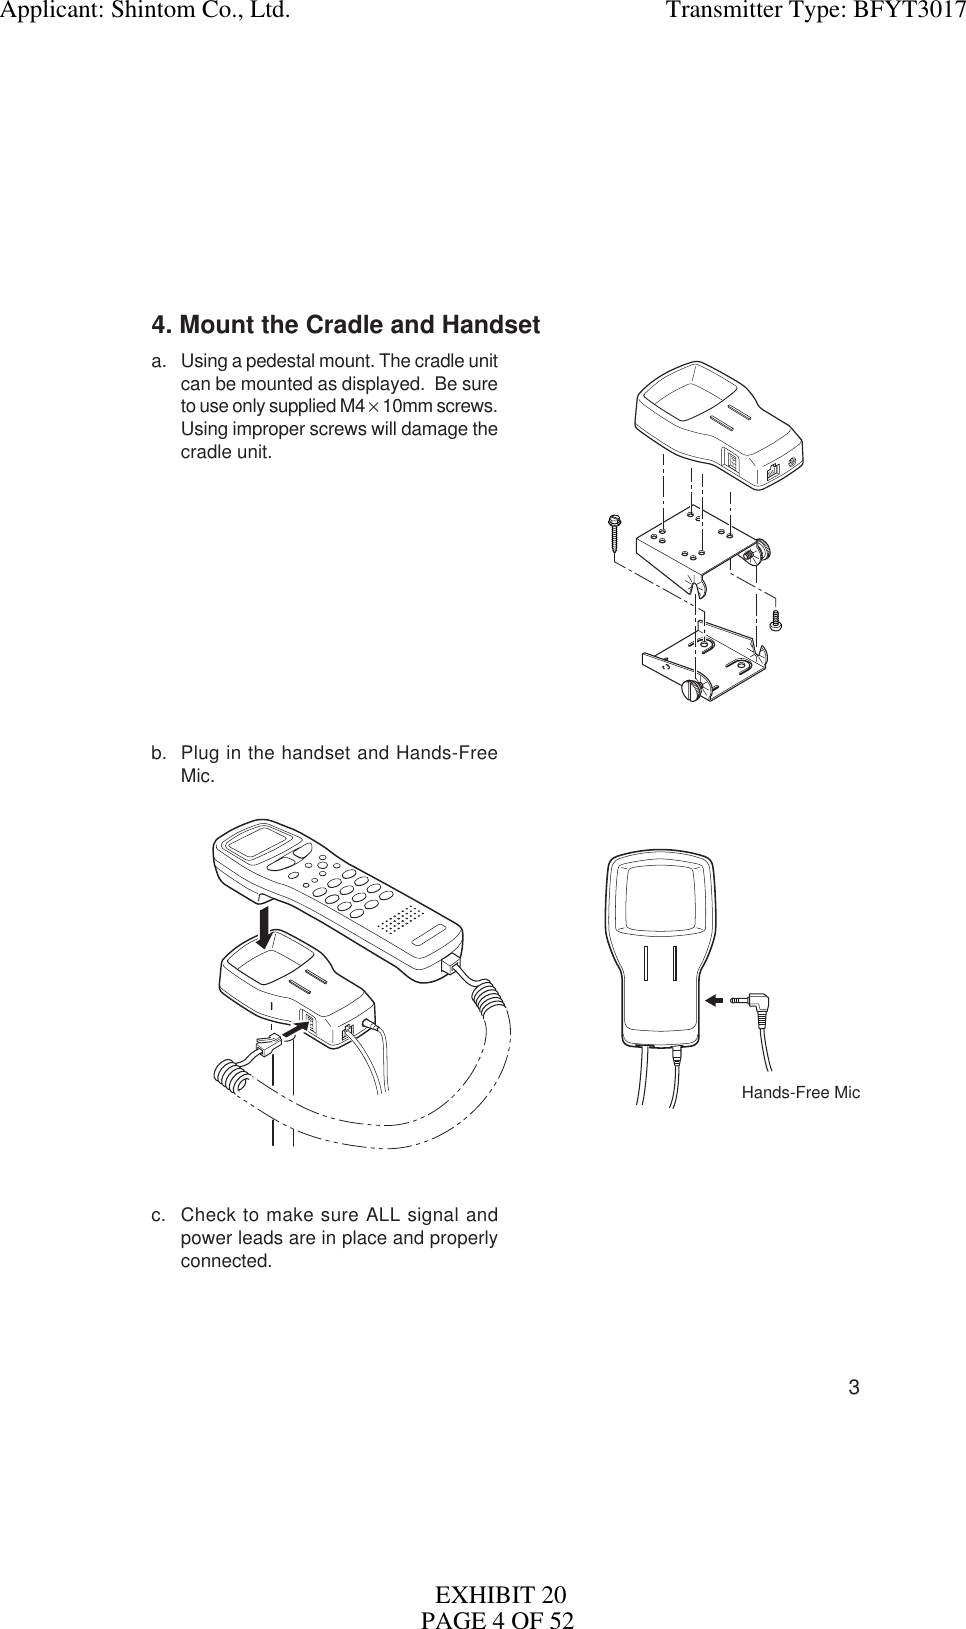 34. Mount the Cradle and Handseta. Using a pedestal mount. The cradle unitcan be mounted as displayed.  Be sureto use only supplied M4 × 10mm screws.Using improper screws will damage thecradle unit.b. Plug in the handset and Hands-FreeMic.c. Check to make sure ALL signal andpower leads are in place and properlyconnected.Hands-Free MicApplicant: Shintom Co., Ltd.                                                            Transmitter Type: BFYT3017EXHIBIT 20PAGE 4 OF 52